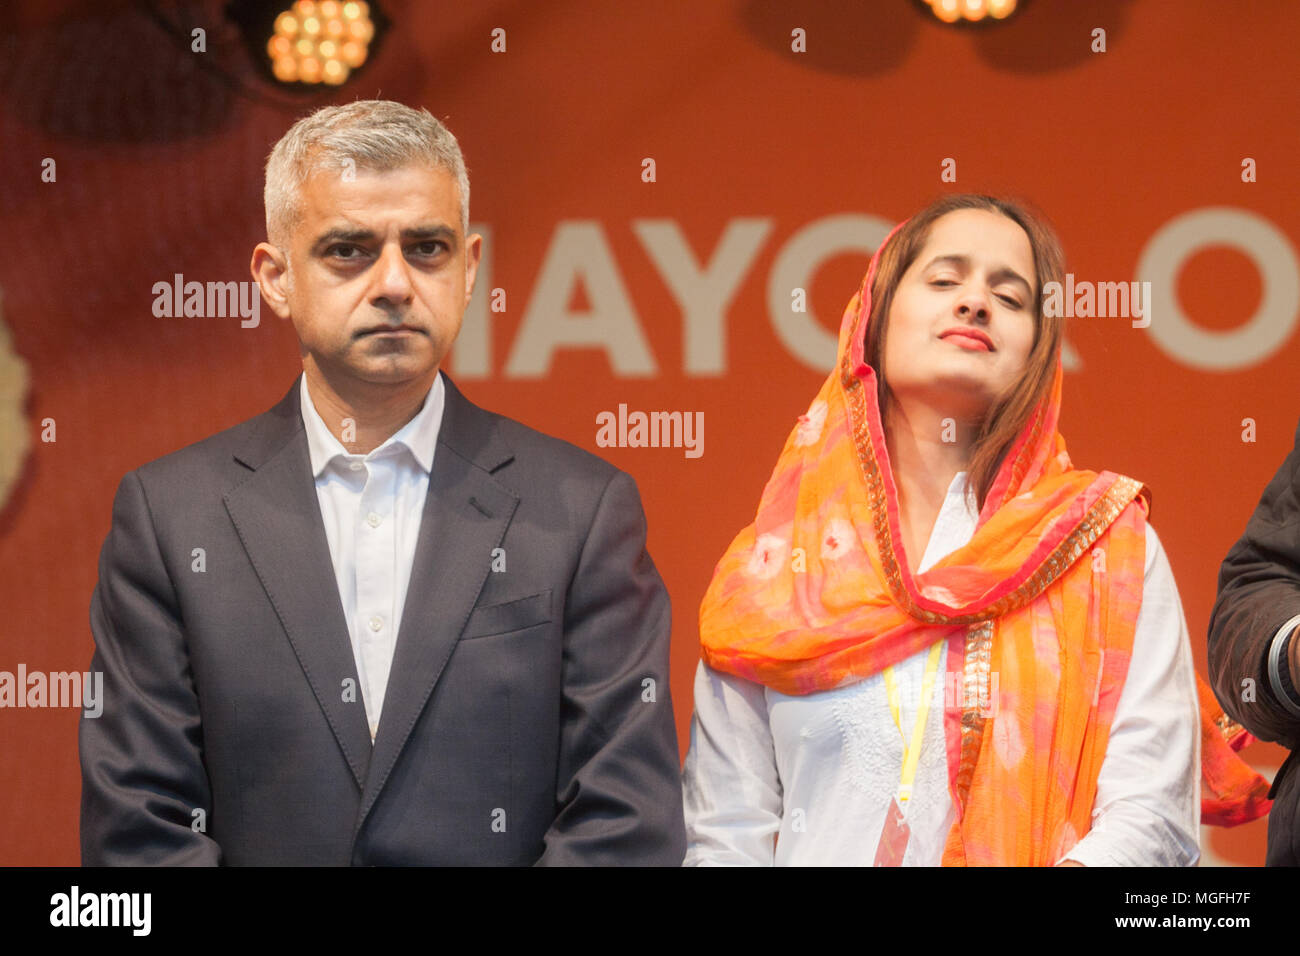 London UK. 28th Aril 2018. Londo Mayor Sadiq Khan attends Vaisakhi festival in Trafalgar Square which  celebrates Sikh and Punjabi tradition, heritage and culture Credit: amer ghazzal/Alamy Live News Stock Photo